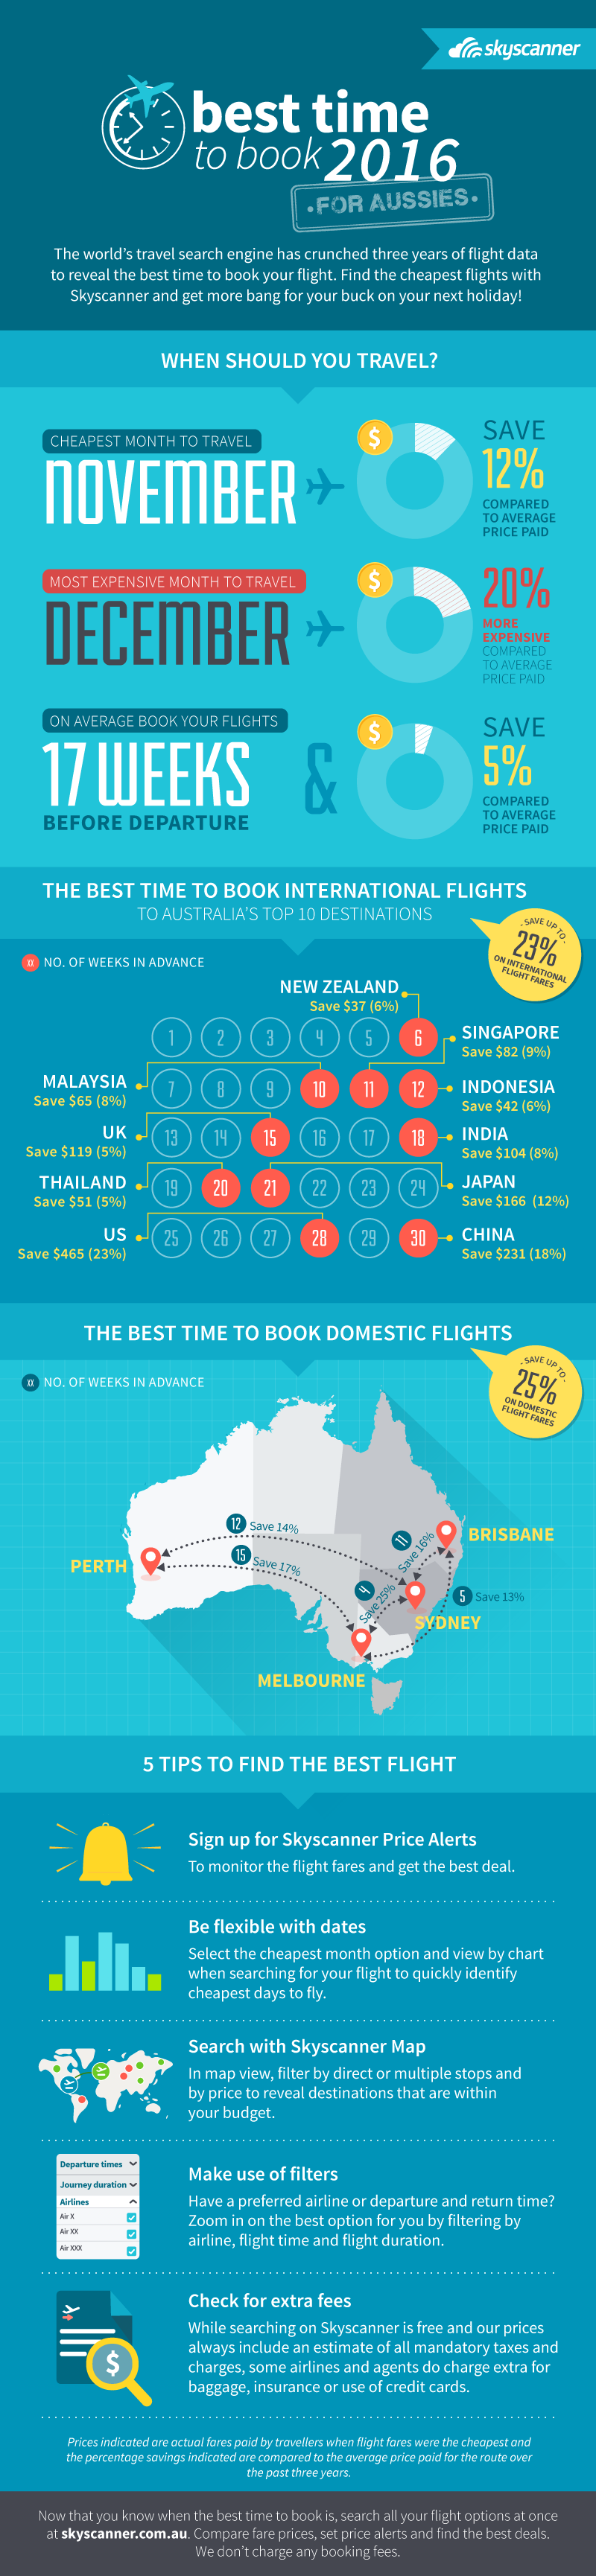 Best time to book flights (for Aussies)